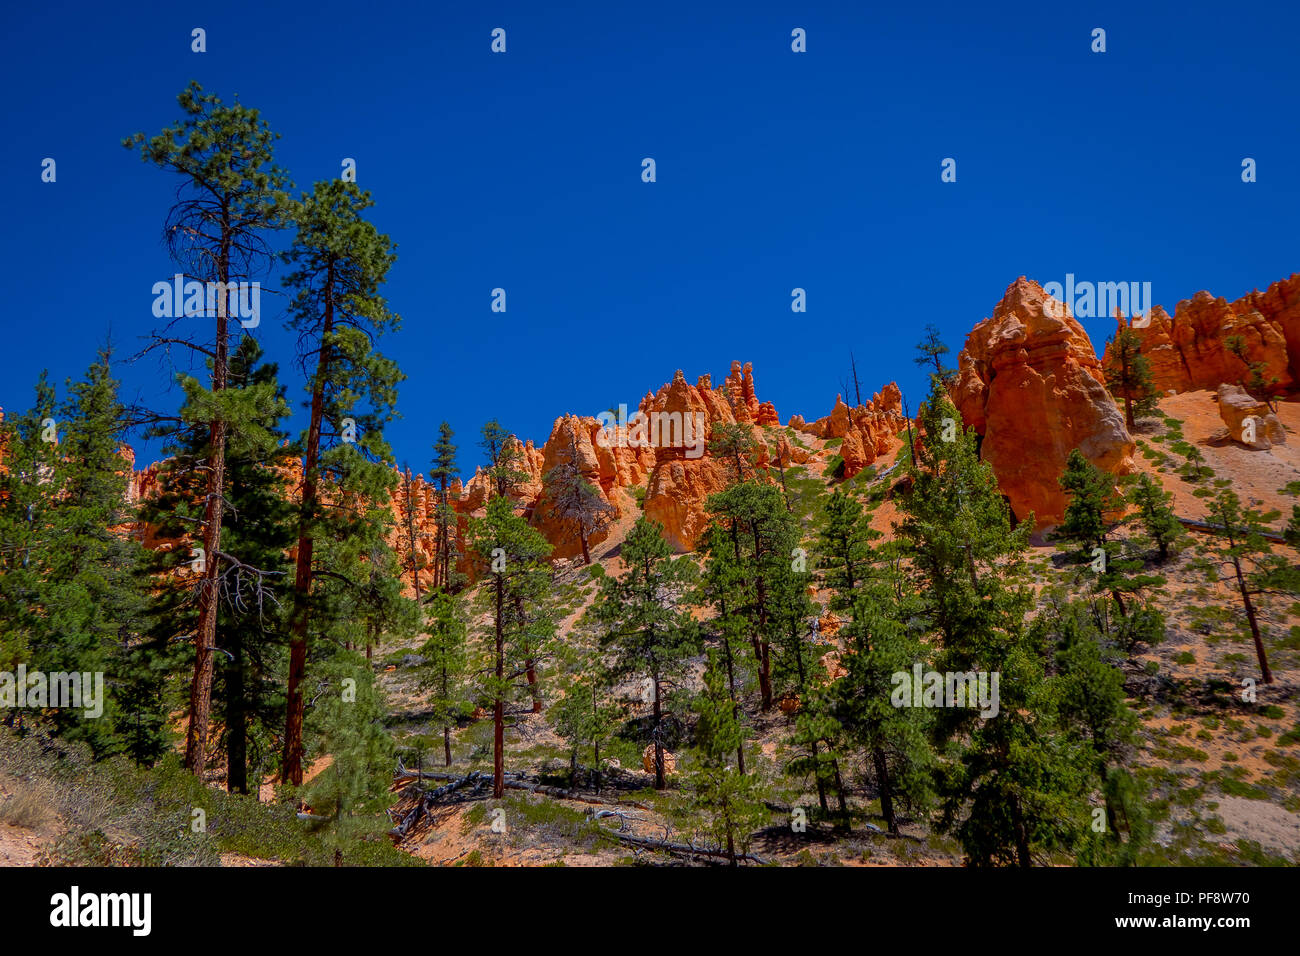 Beautiful outdoor view of pinyon pine tree forest Bryce Canyon National Park Utah Stock Photo